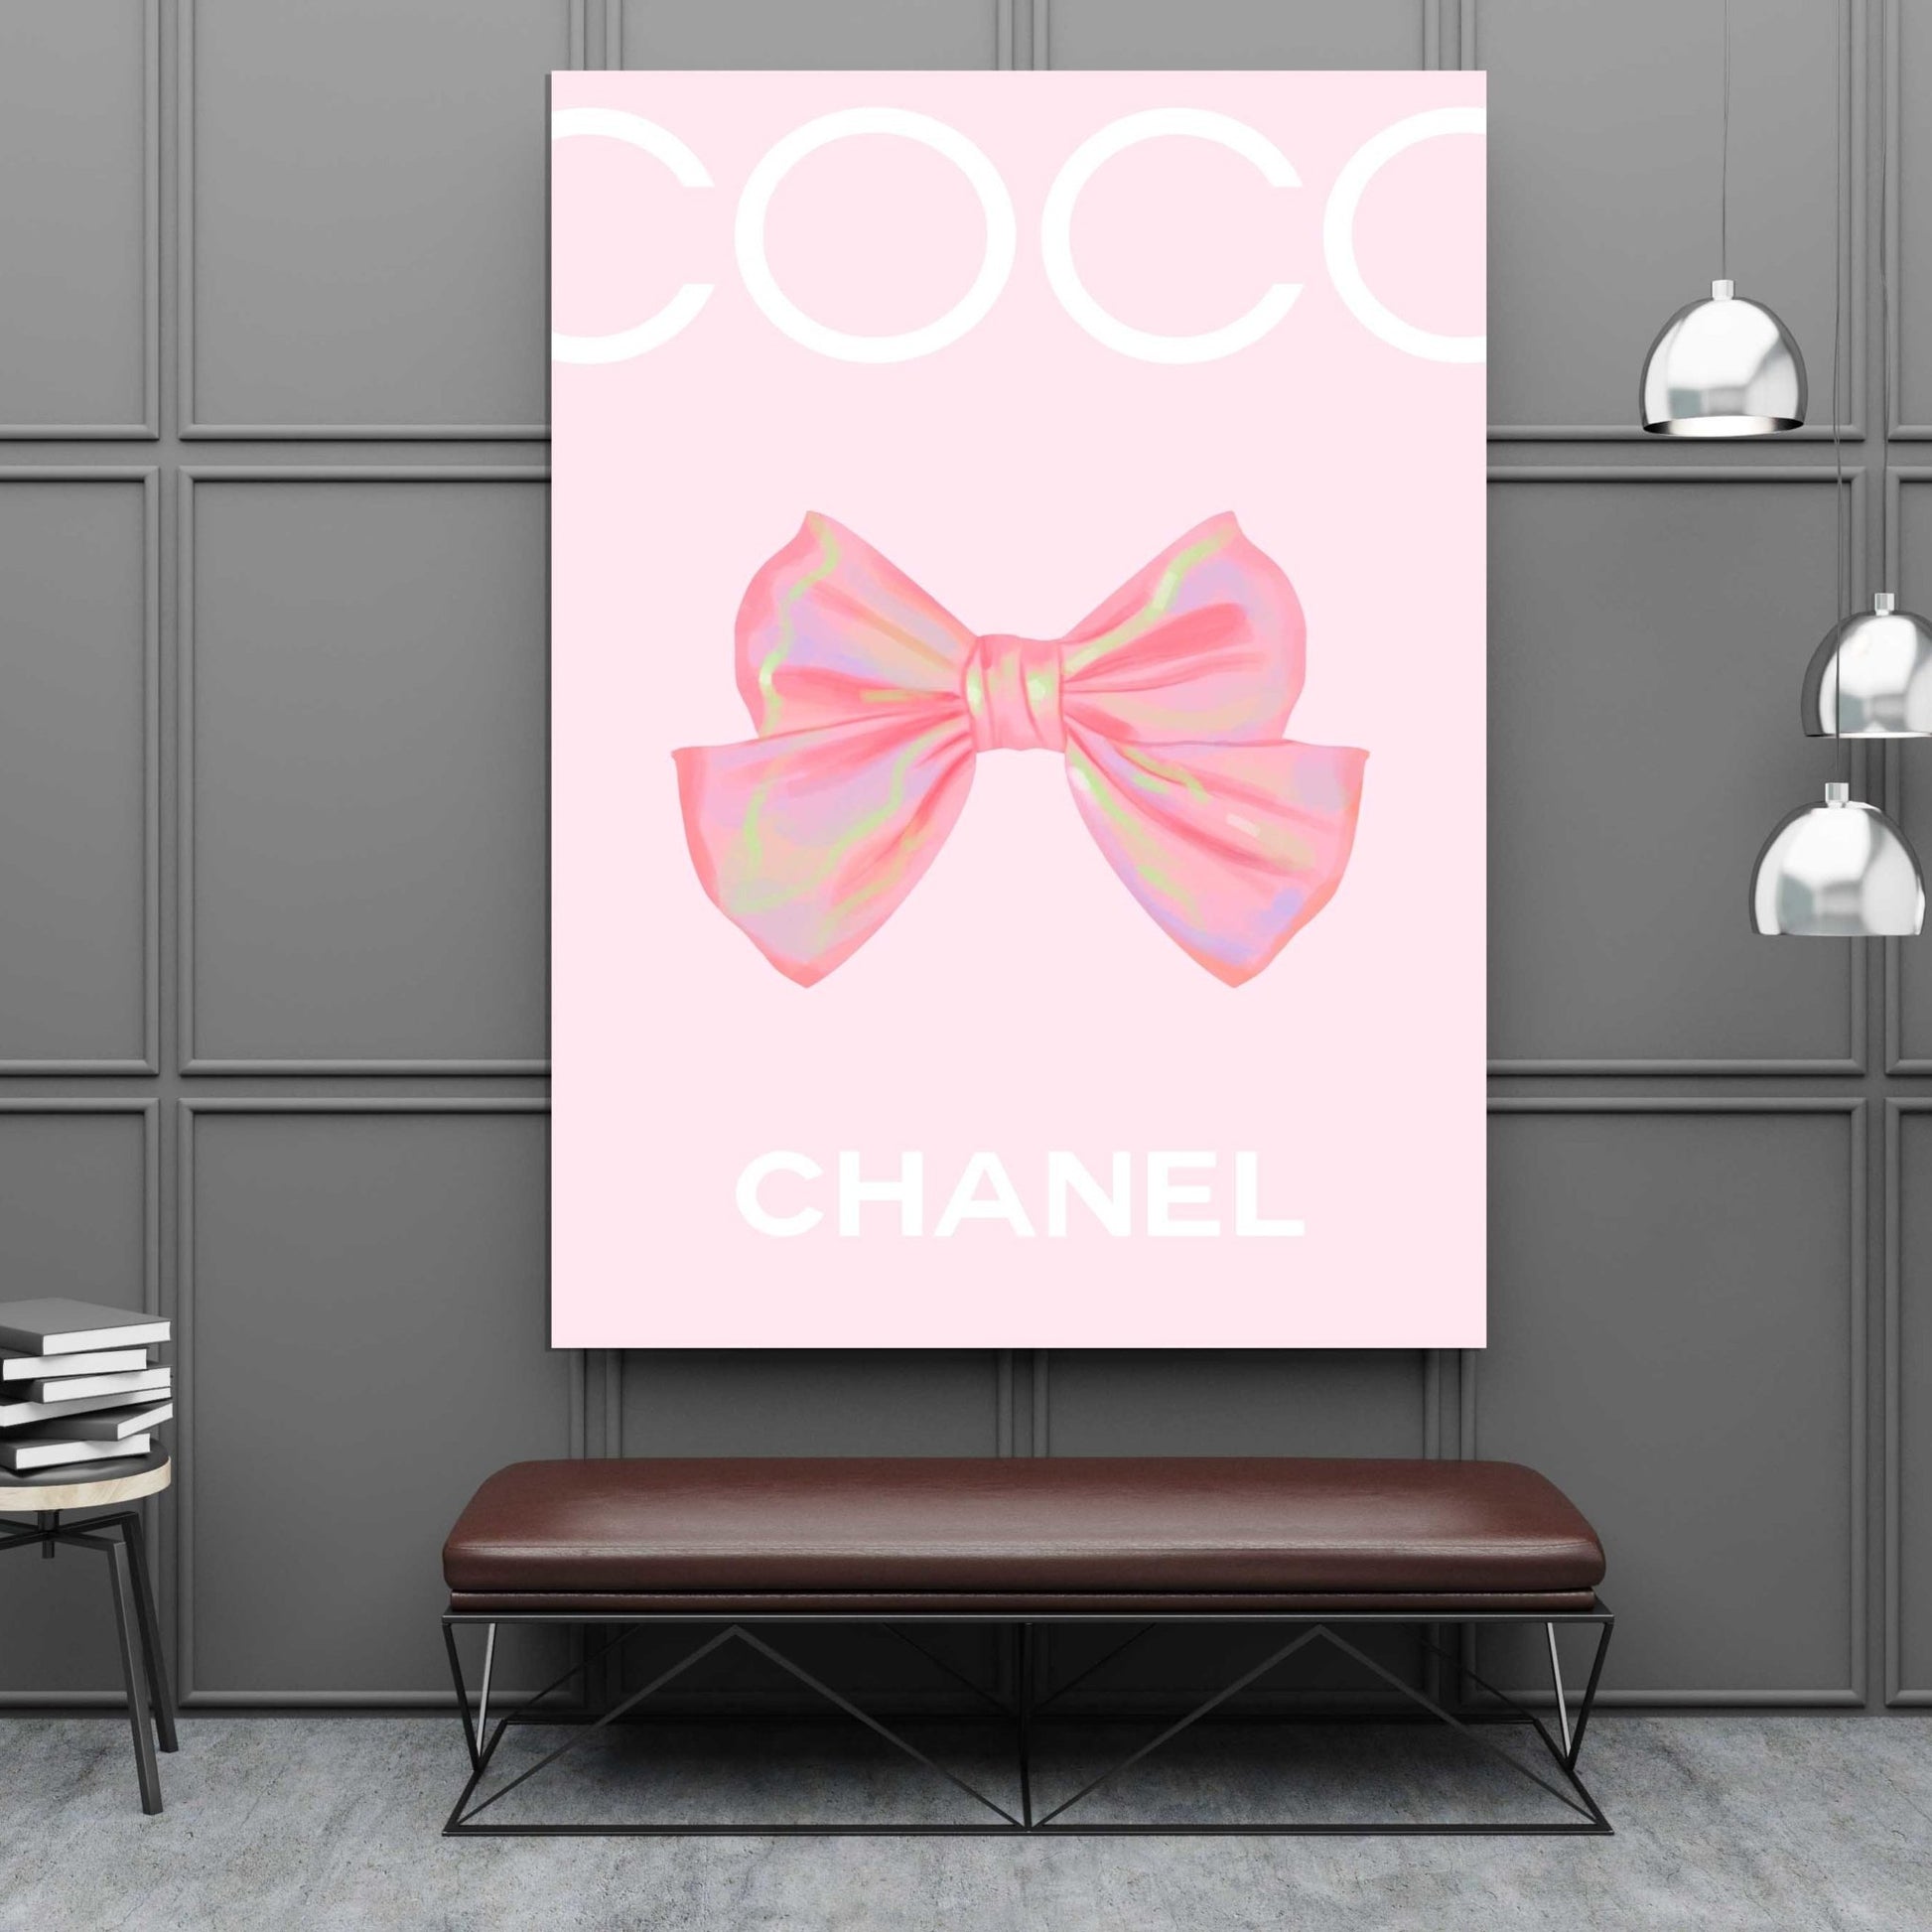 Chanel Wall Decal